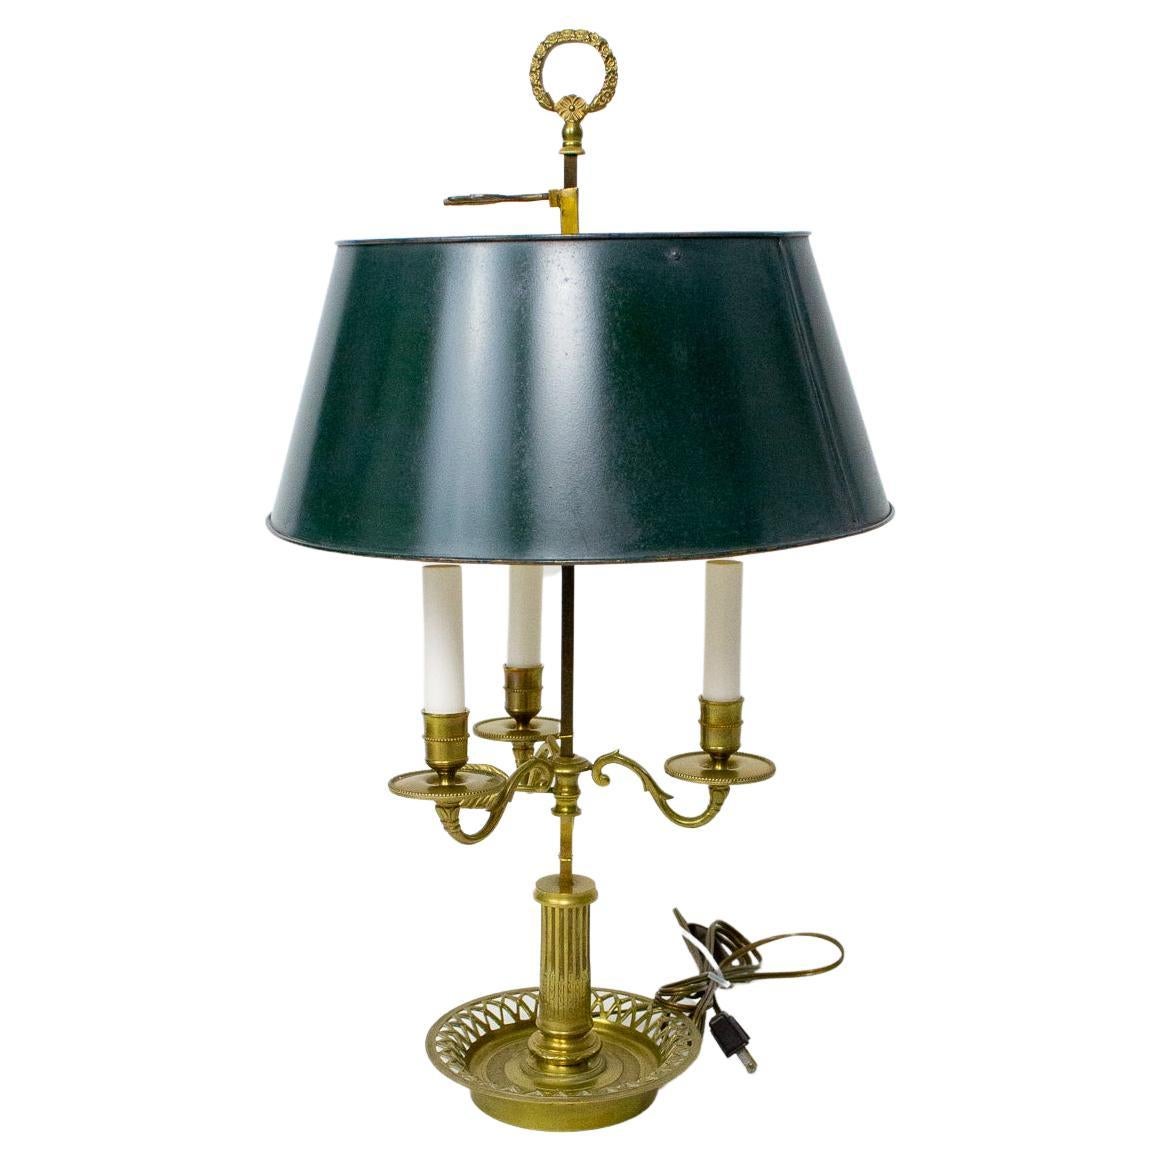 Bouillote Lamp with Green Shade